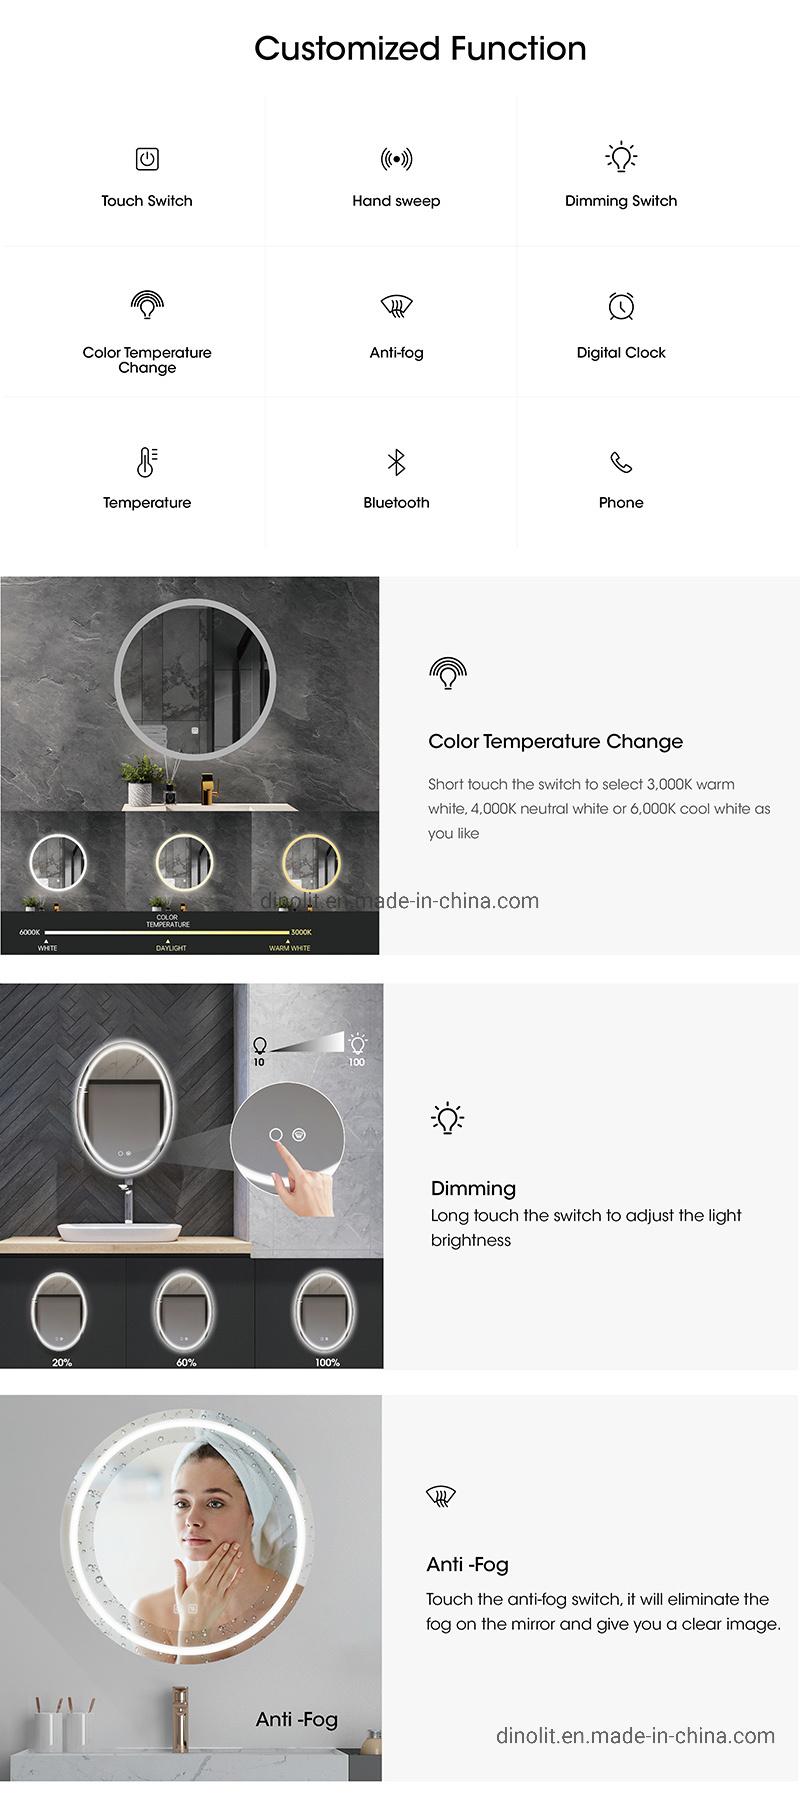 Hot Sales Customized Waterproof LED Bath Glass Bathroom Lighting Wall Vanity Lighted Mirror with Touch Sensor Switch IP44 (Dimmer, bluetooth speaker function)